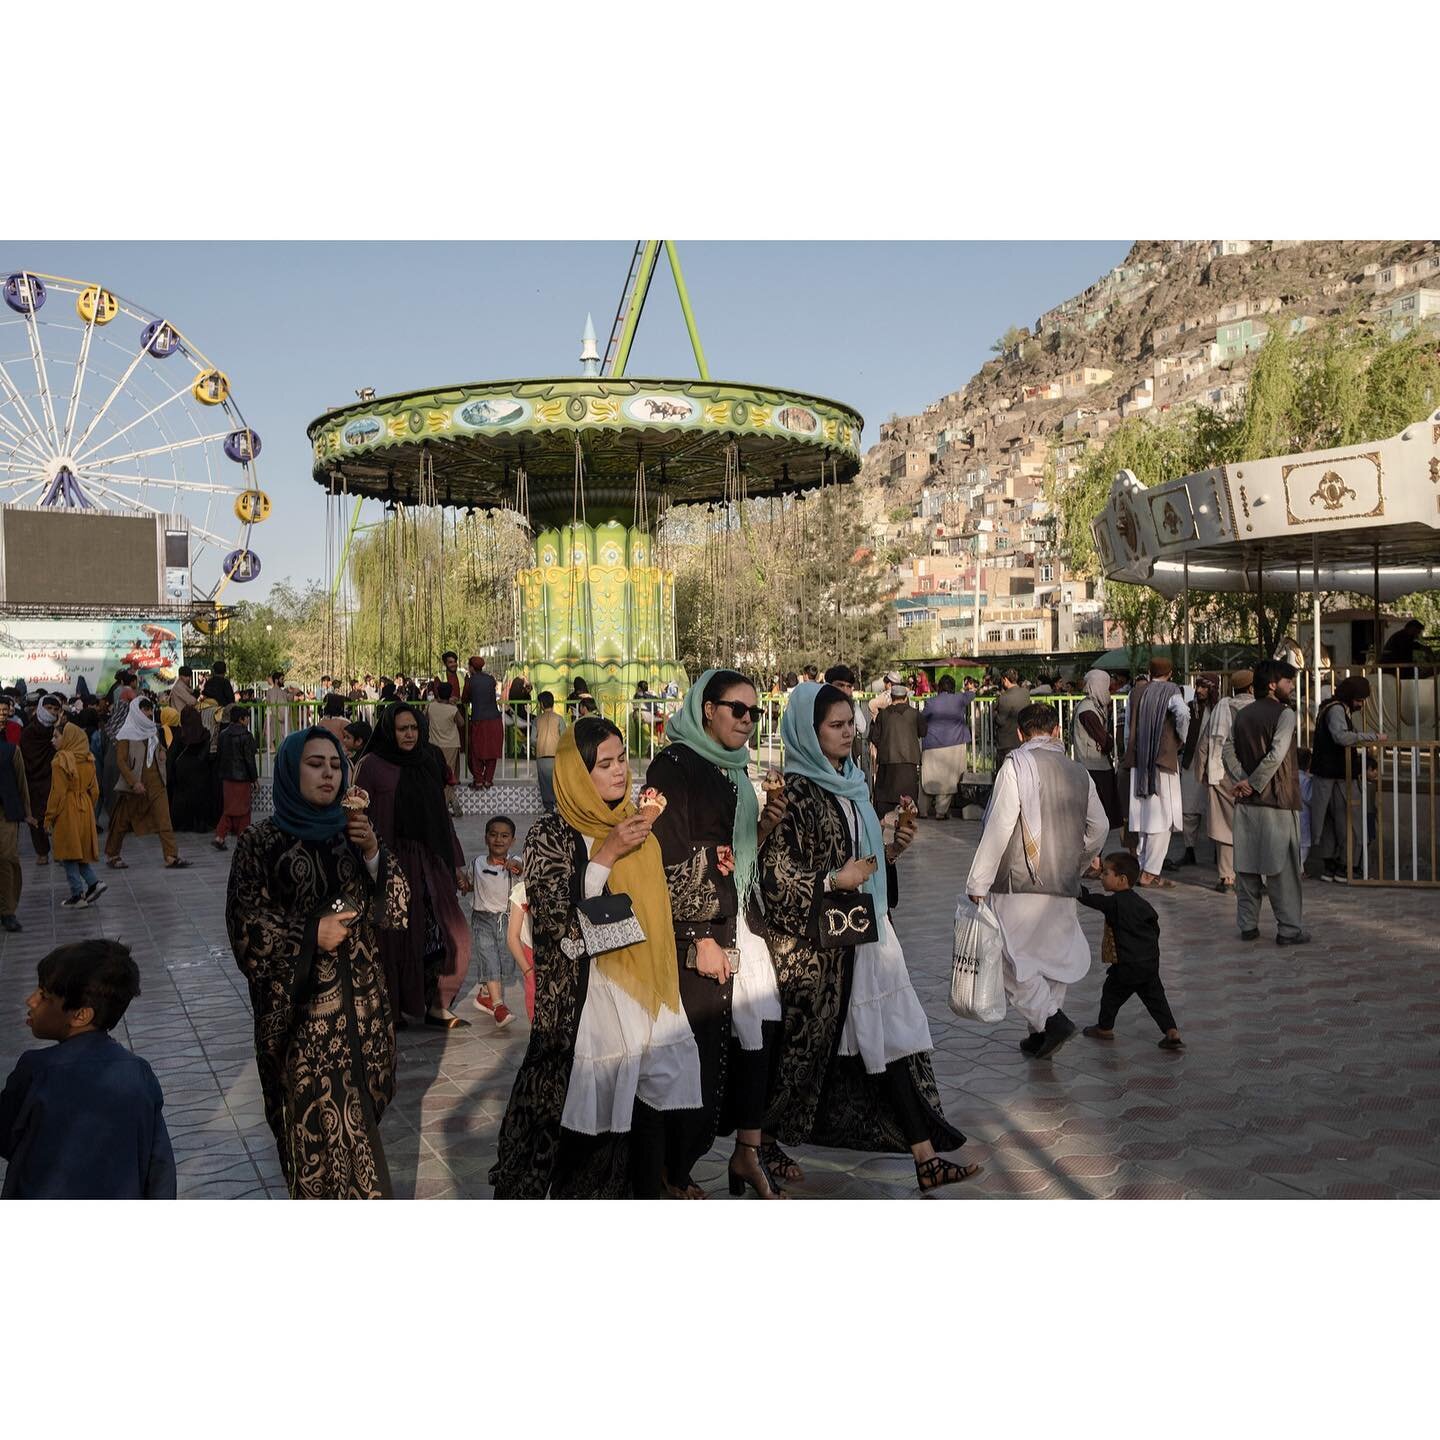 Earlier this month was the last time for now where Afghan parents, together, could take their children to ride carousels in Afghan parks. For the first day of Ramadan the Taliban announced gender segregation for amusement parks as part of a range of 